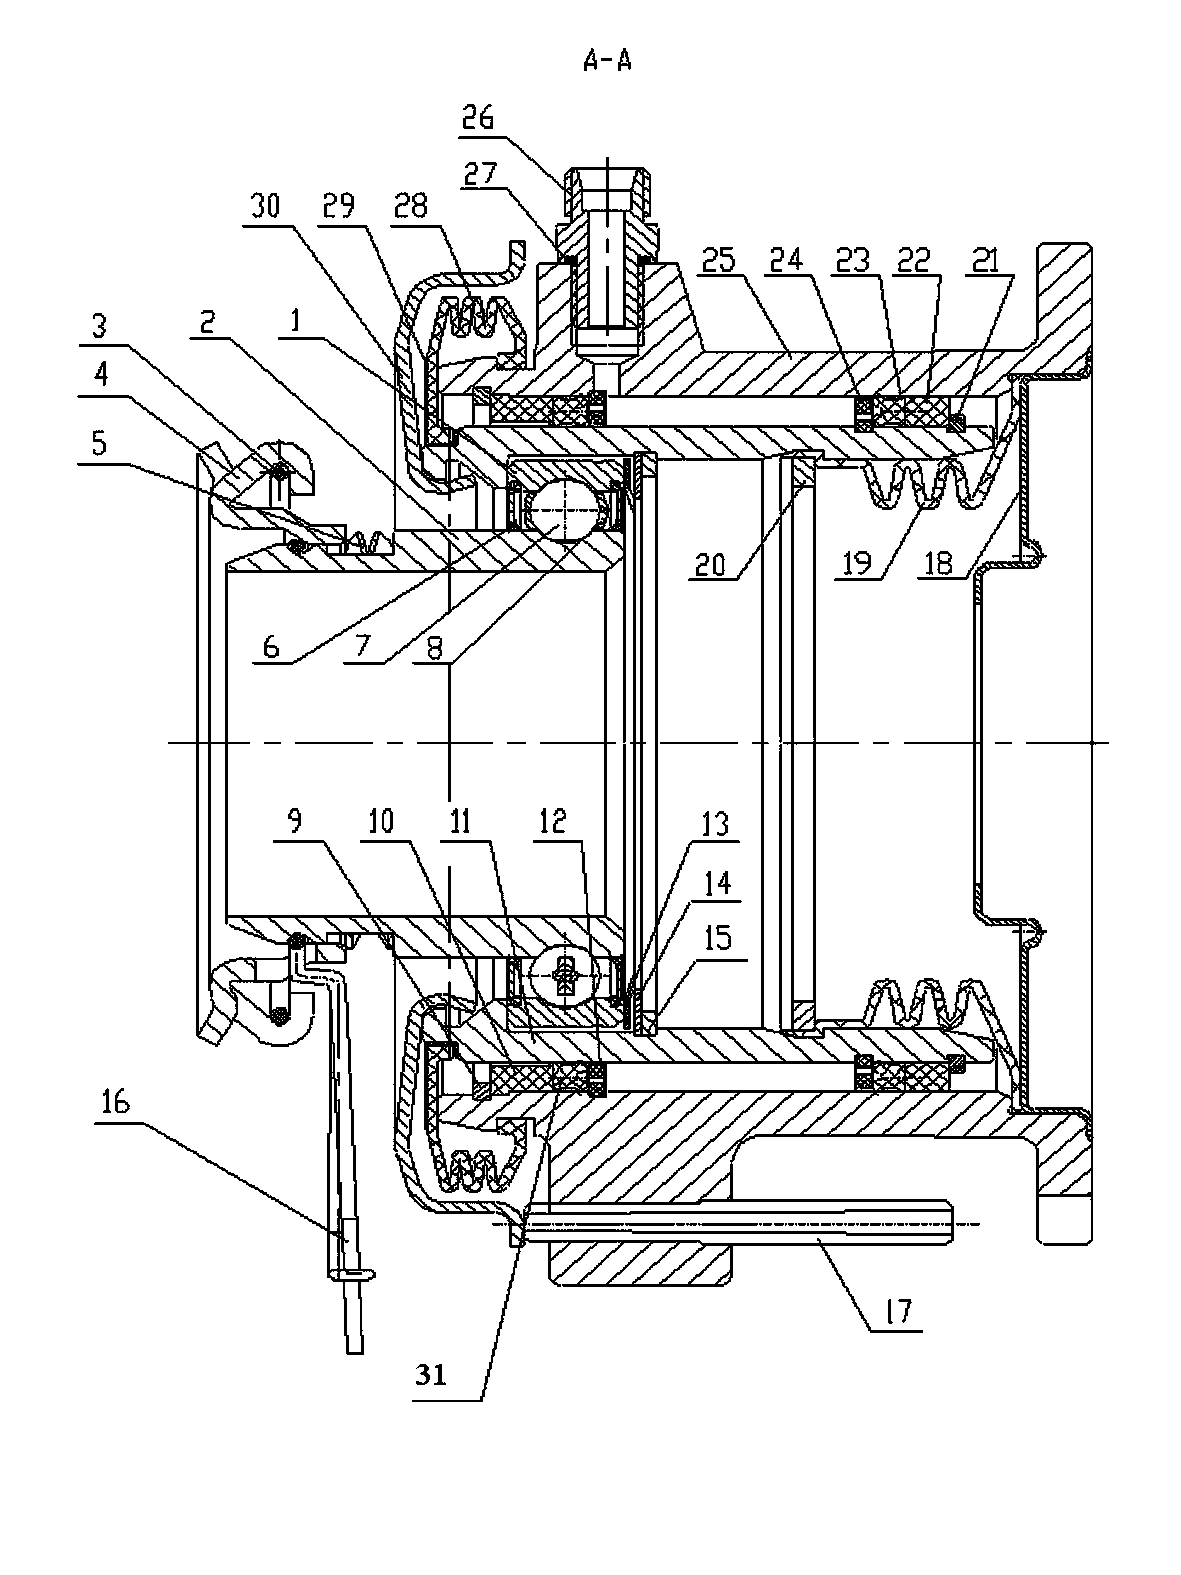 Pull-type self-aligning hydraulic release bearing sub-pump unit